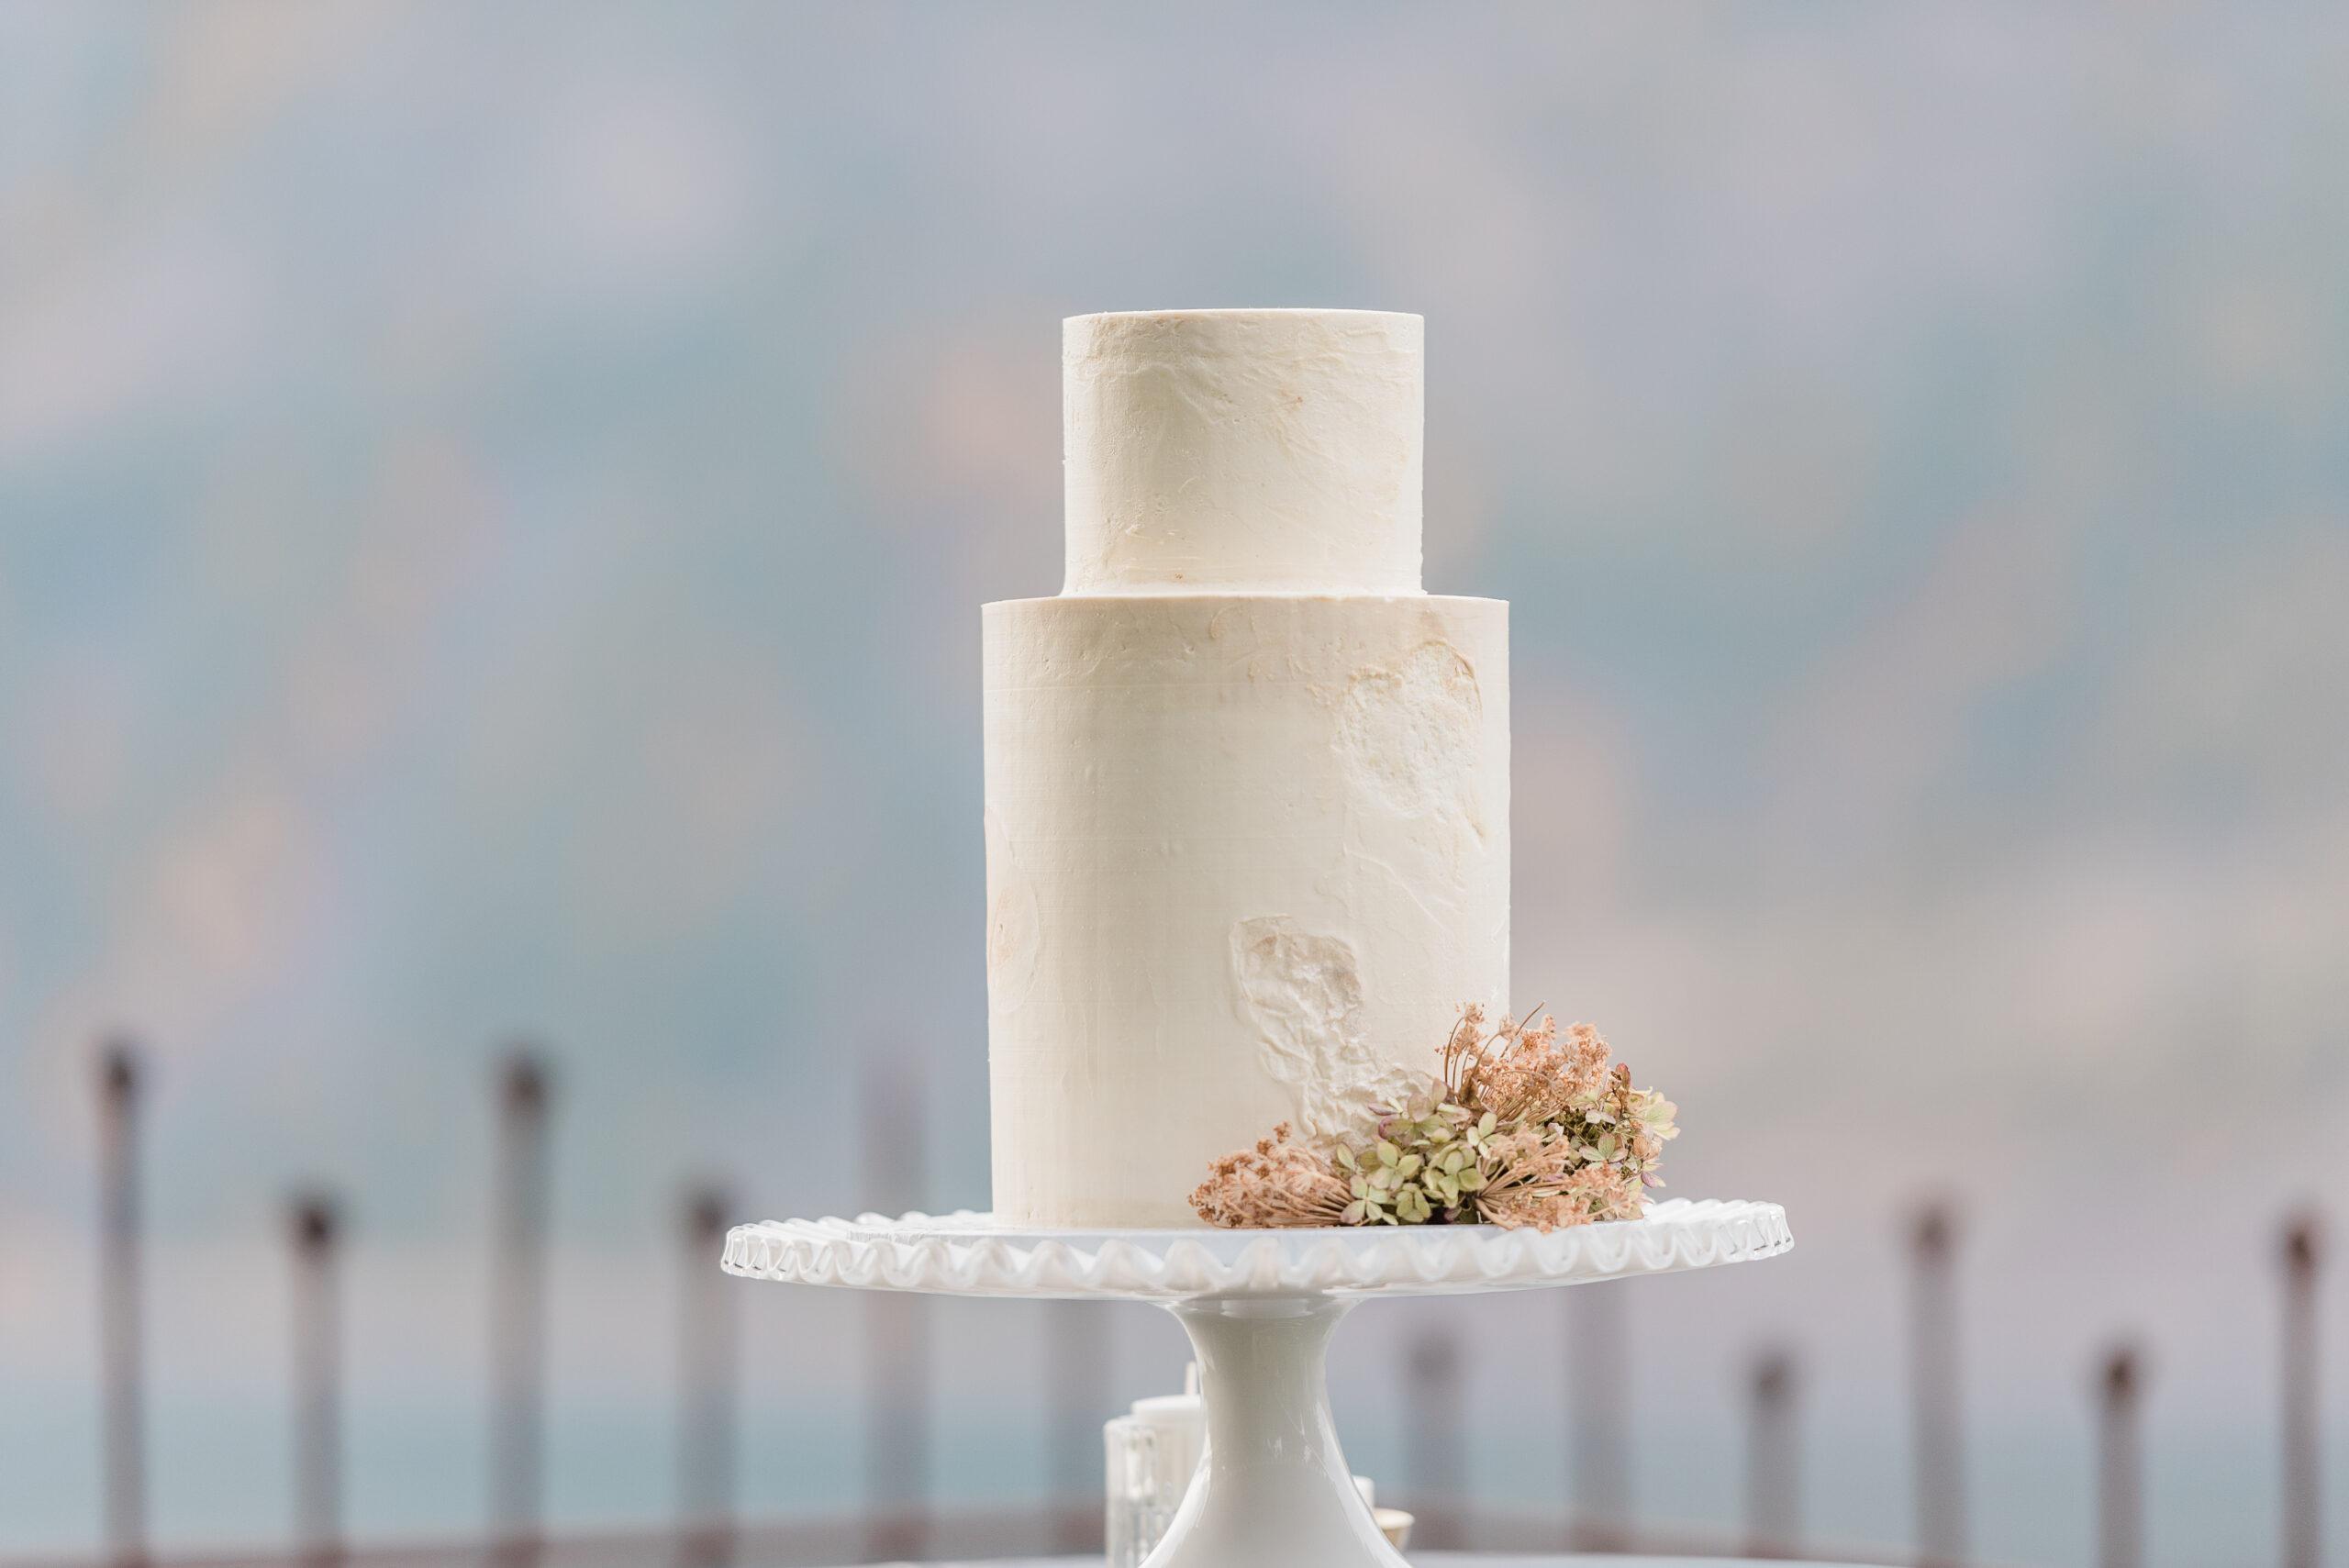 Beautiful wedding cake, baked by one of the top wedding cake bakers in Seattle, WA.